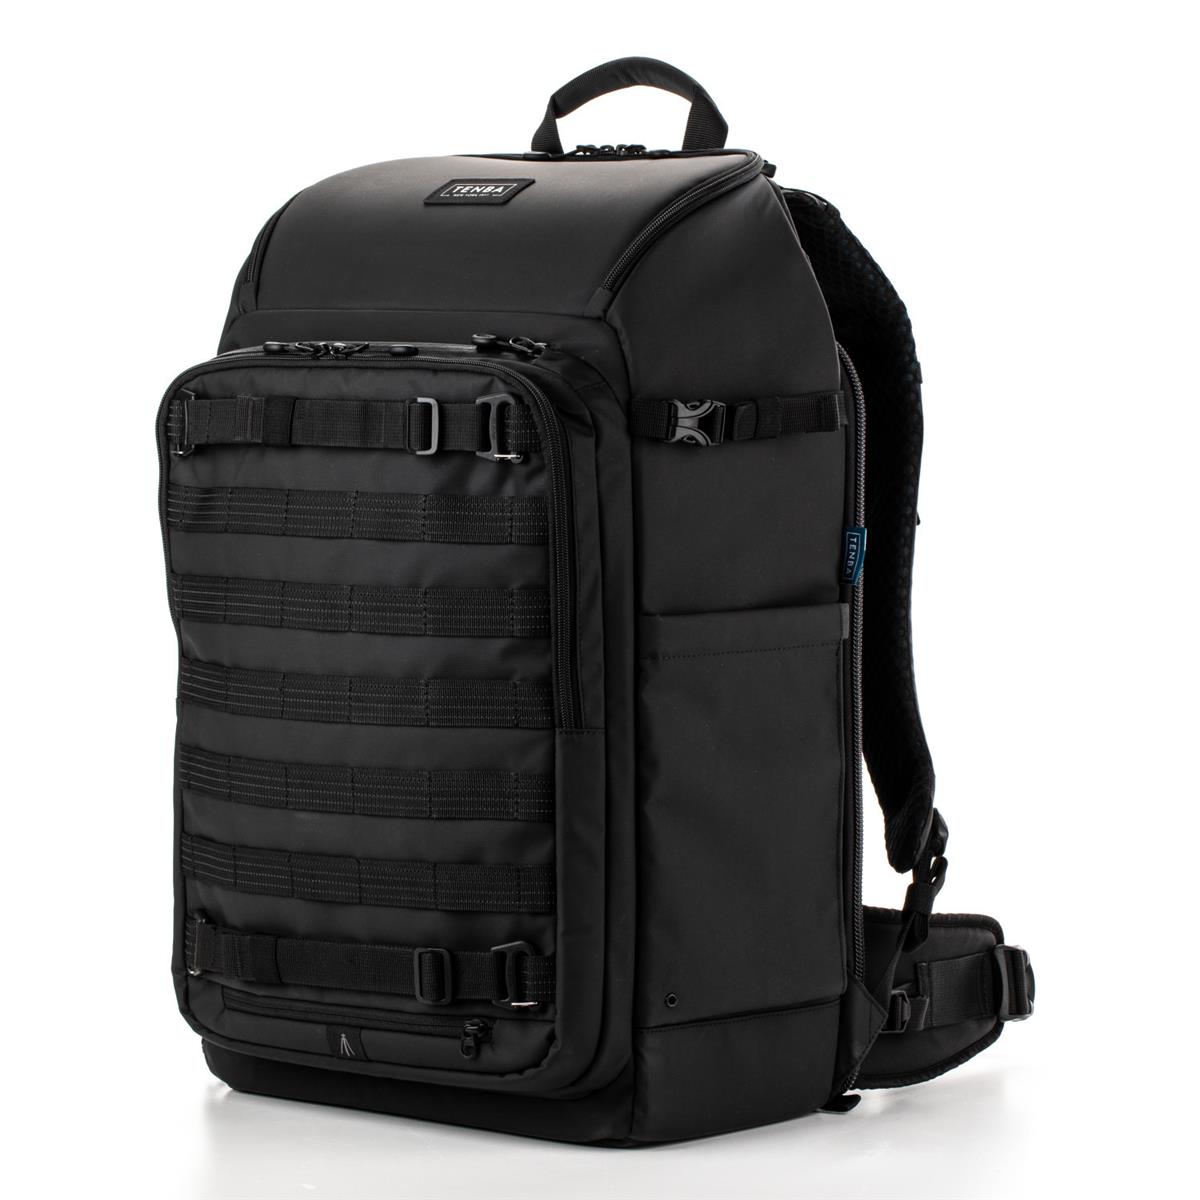 Image of Tenba Axis V2 32L Camera and Laptop Backpack